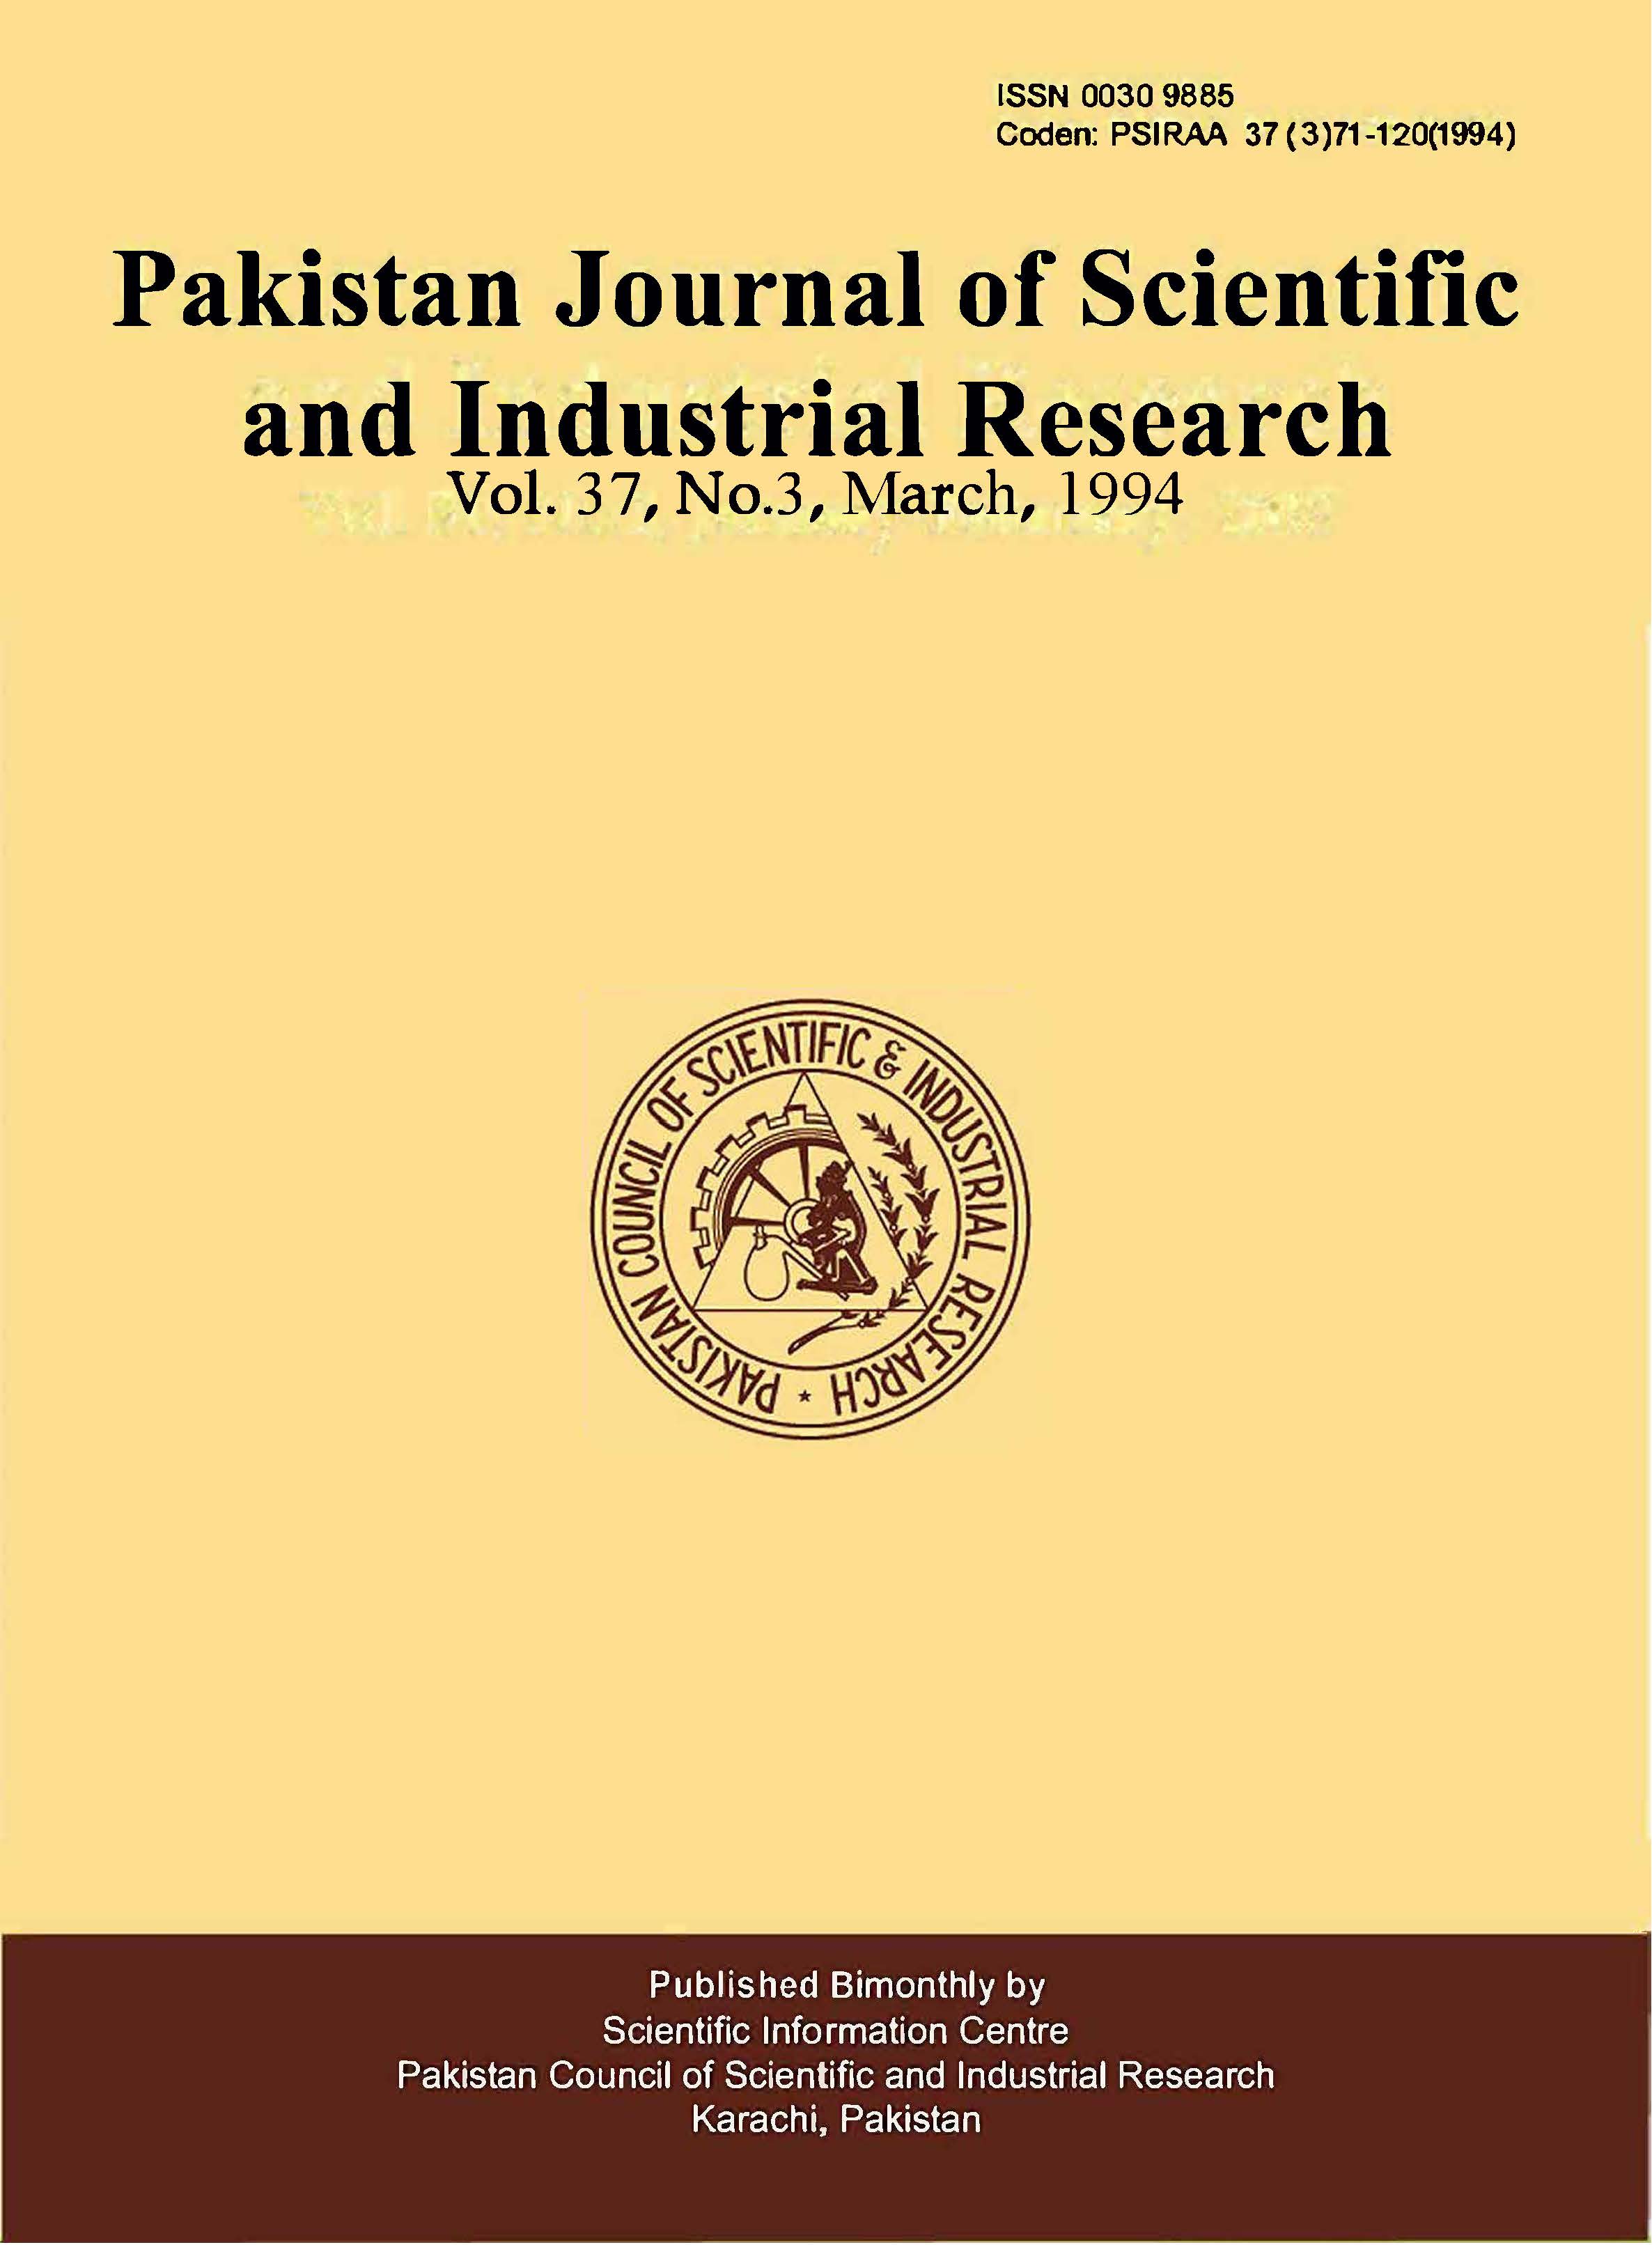 					View Vol. 37 No. 3 (1994): Pakistan Journal of Scientific and Industrial Research
				